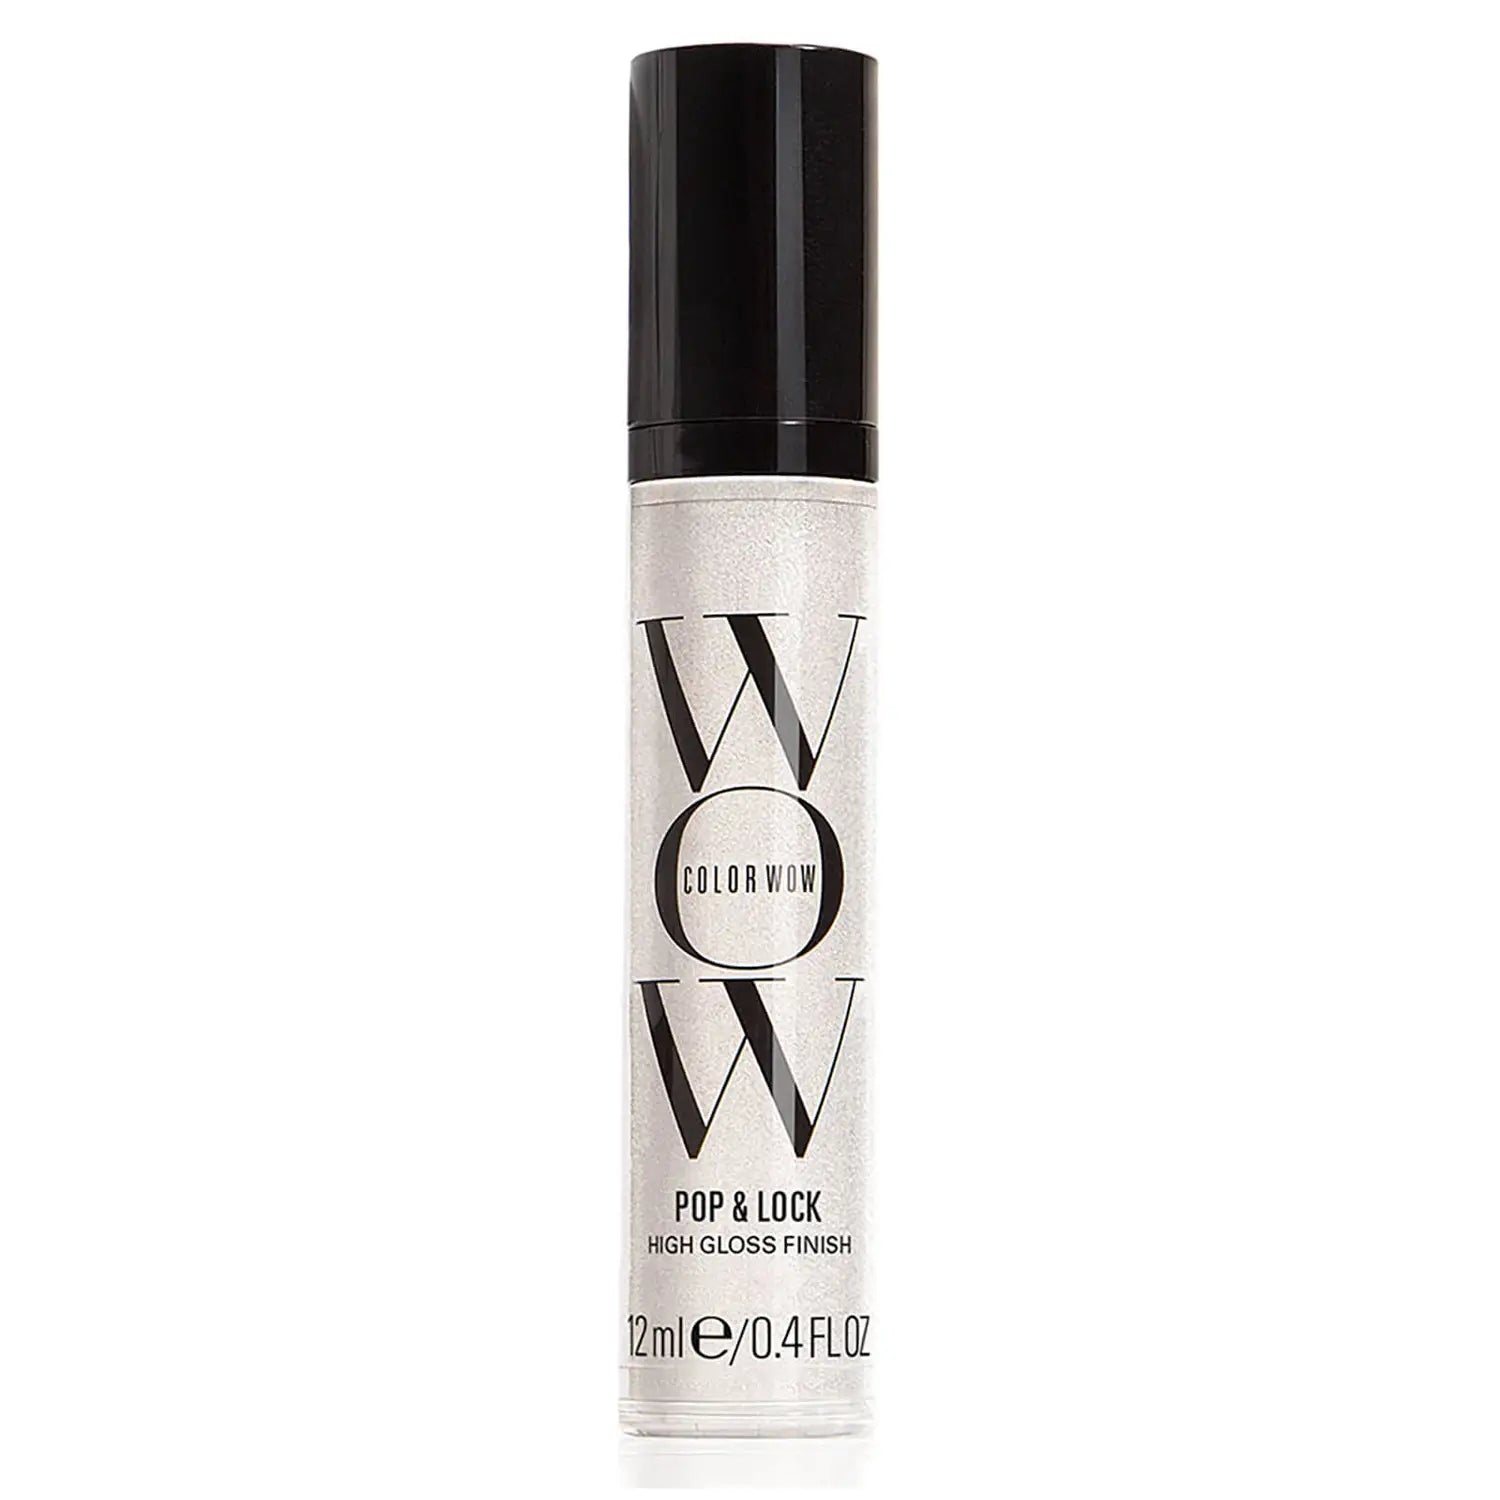 Color Wow Travel Pop & Lock High Gloss Finish 12ml - Color Wow